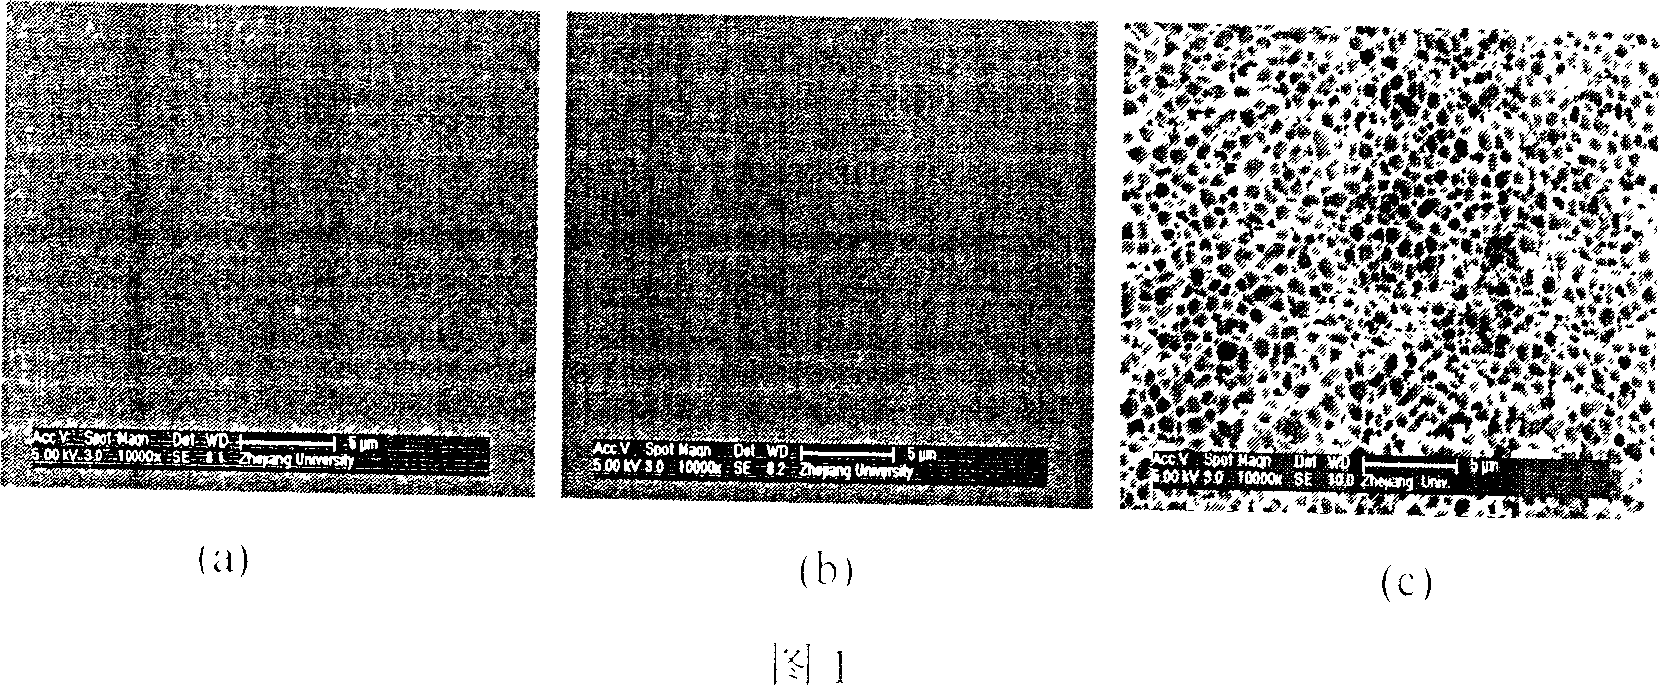 Method of preparing ultra low dielectric constant polyimide membrane by polyamide ester precursor phase transformation